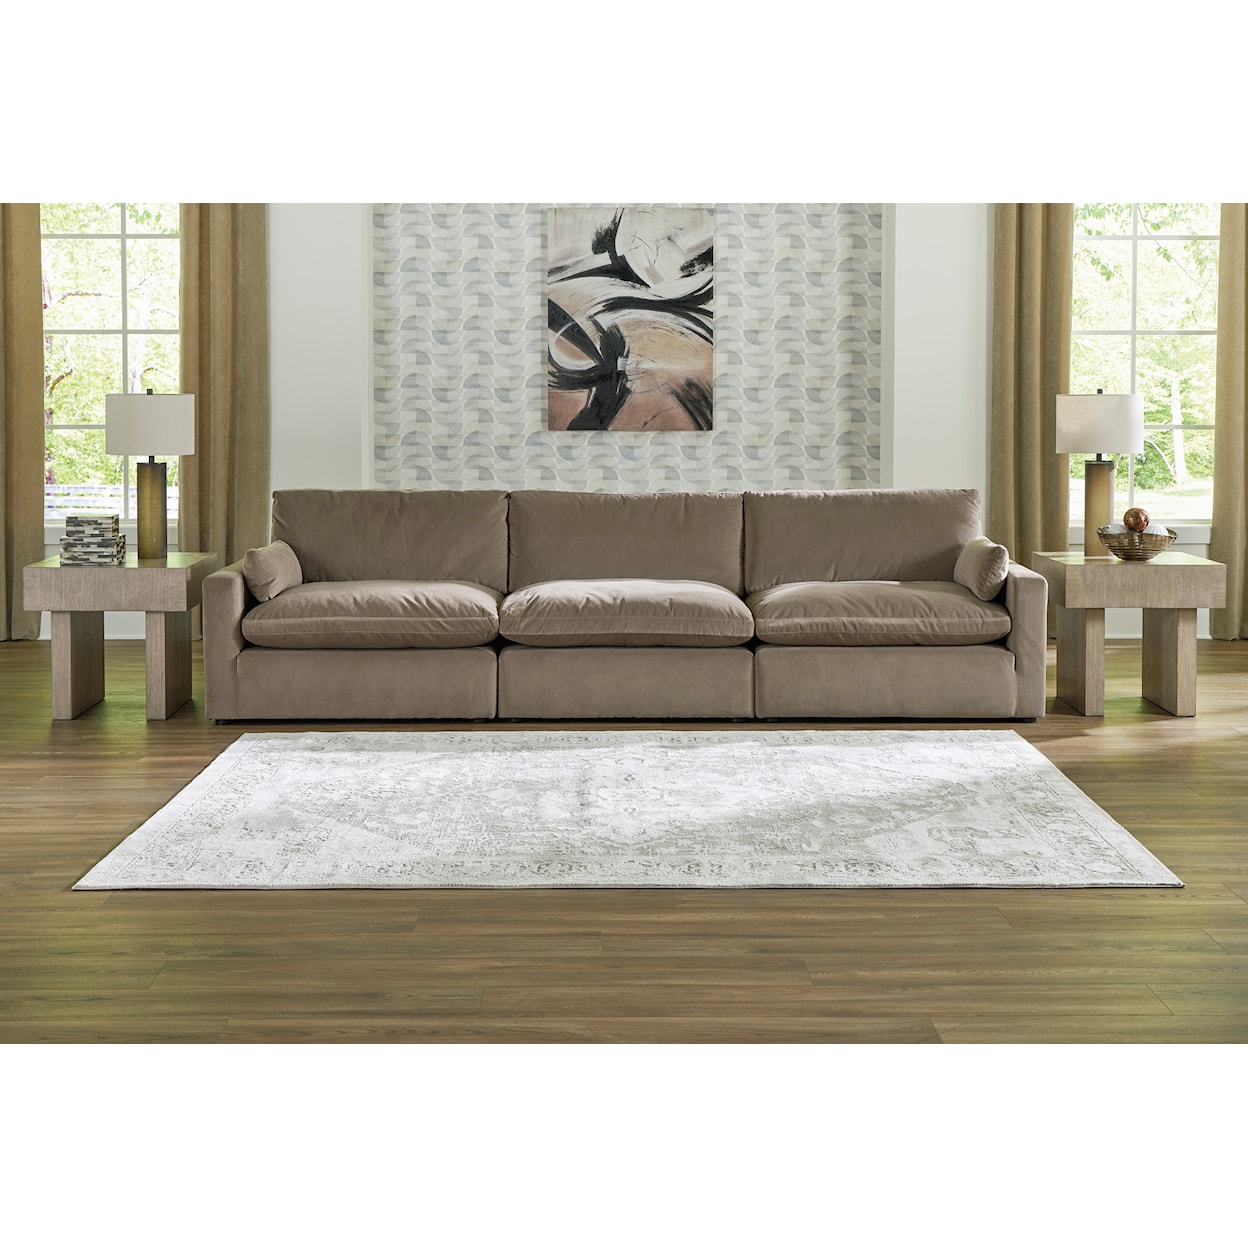 Signature Design by Ashley Furniture Sophie 3-Piece Sectional Sofa